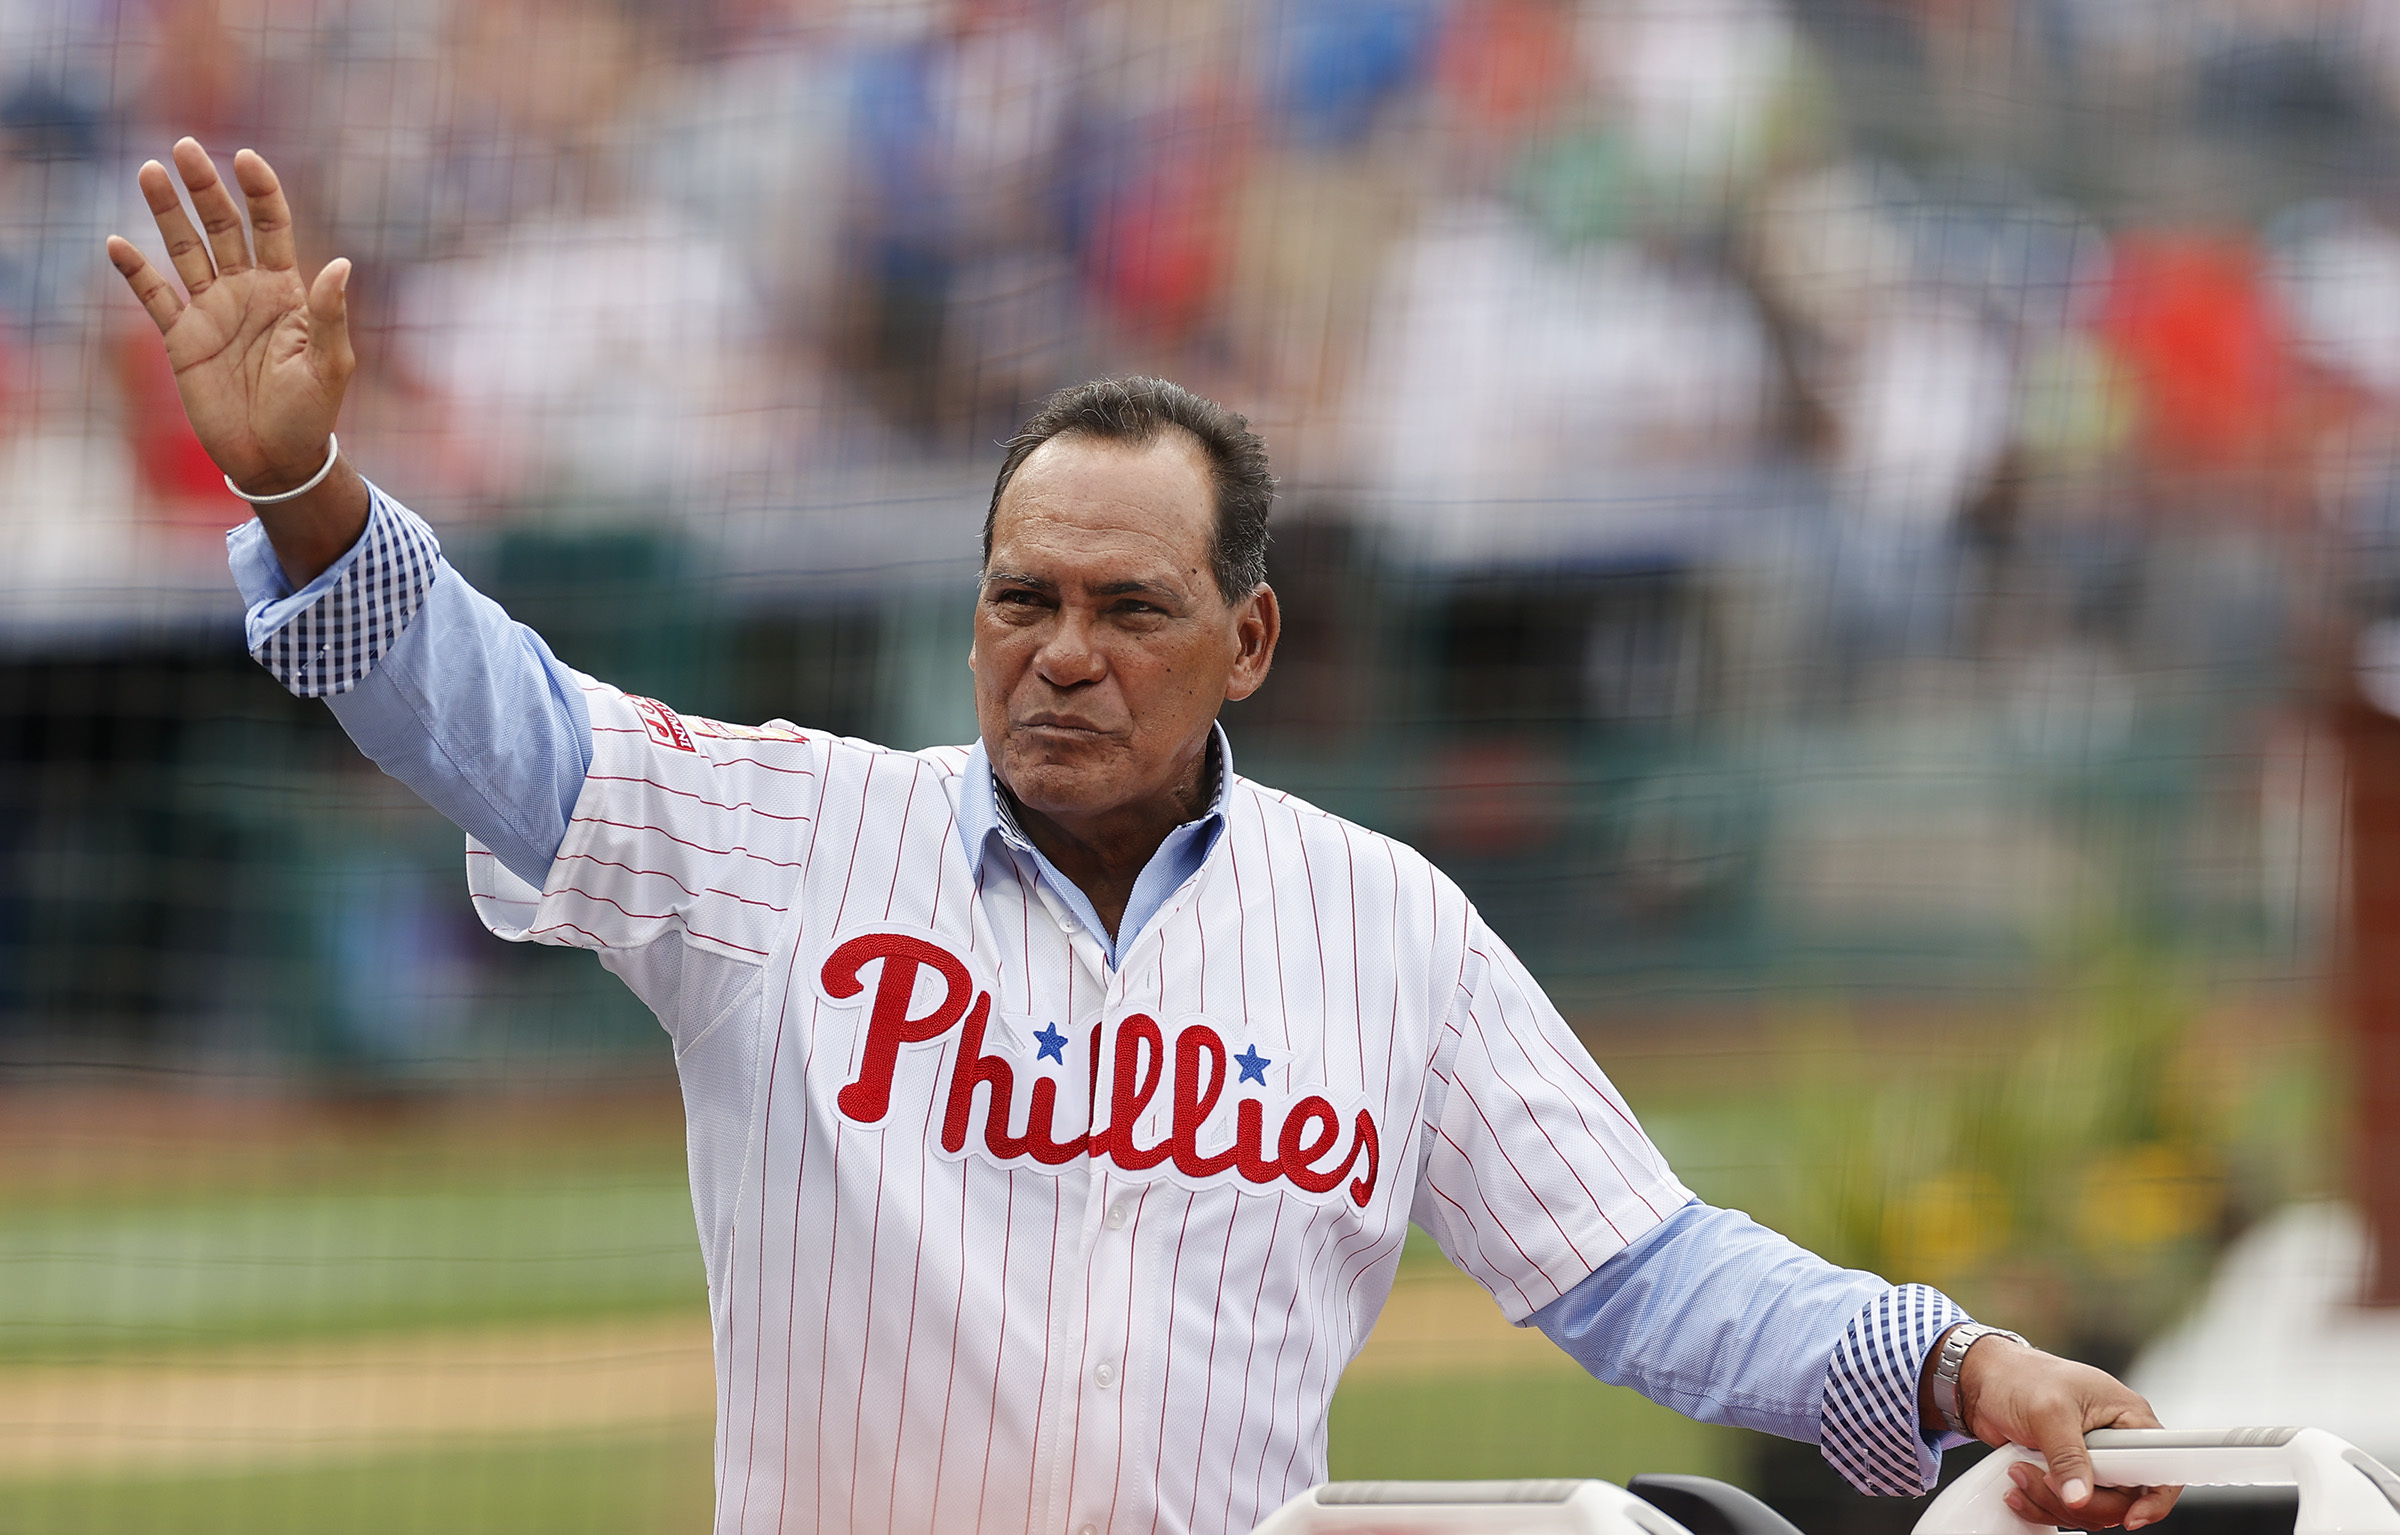 Phillies notes: Trillo, Bowa reflect on the 1980 legacy and an